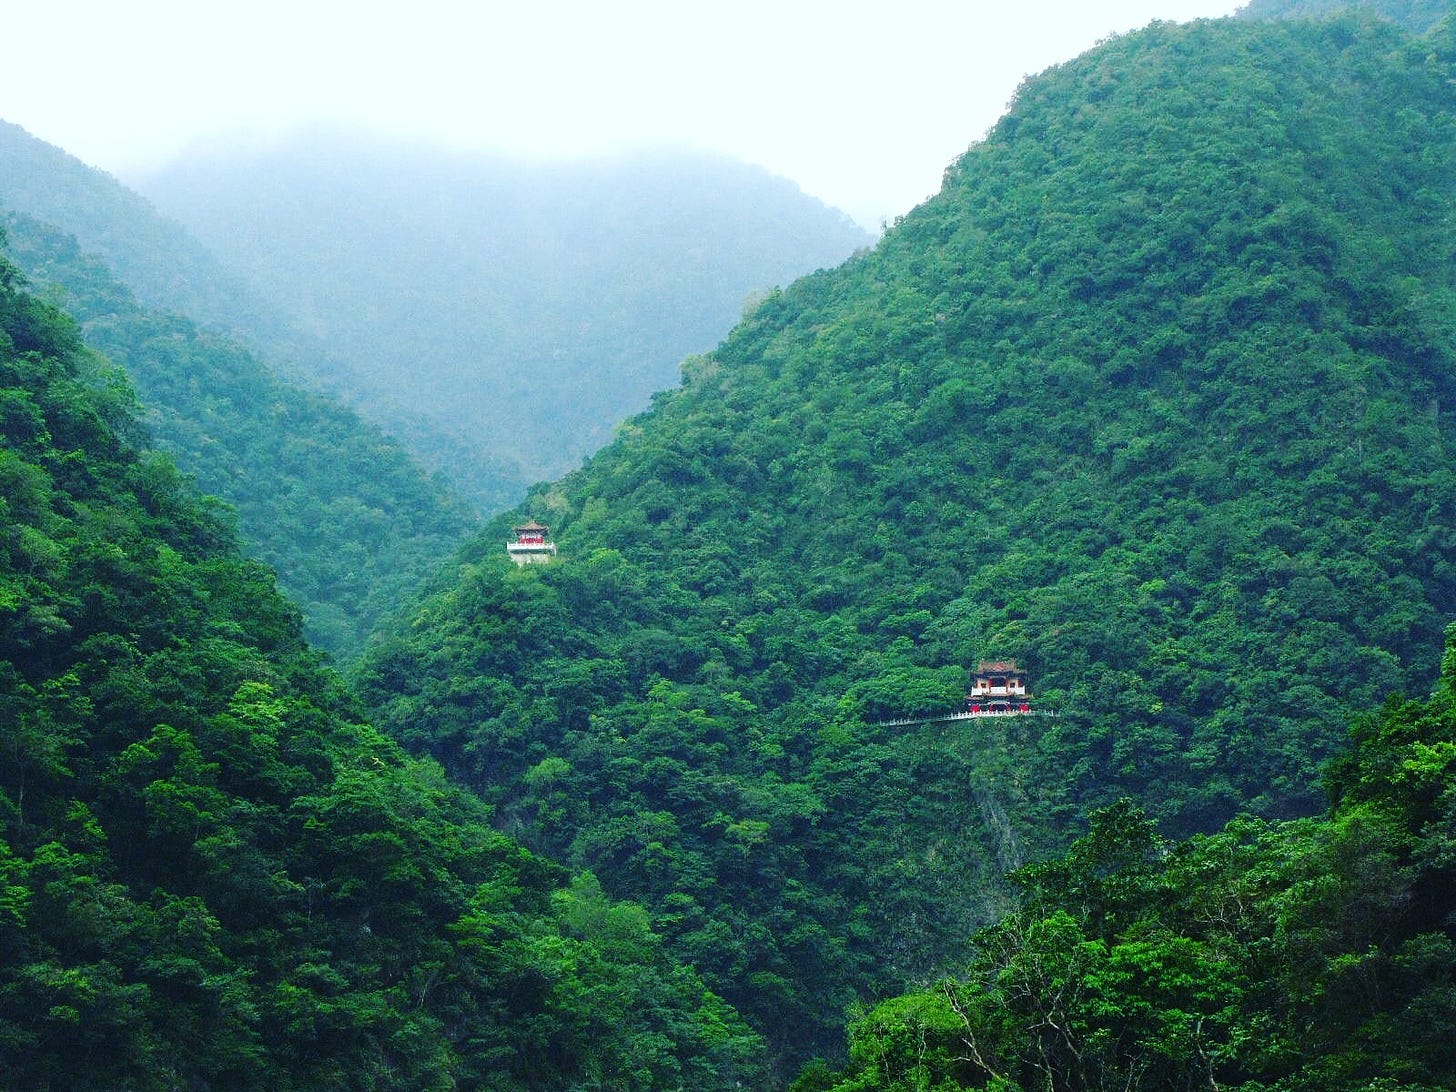 The mountain temples in Taiwan